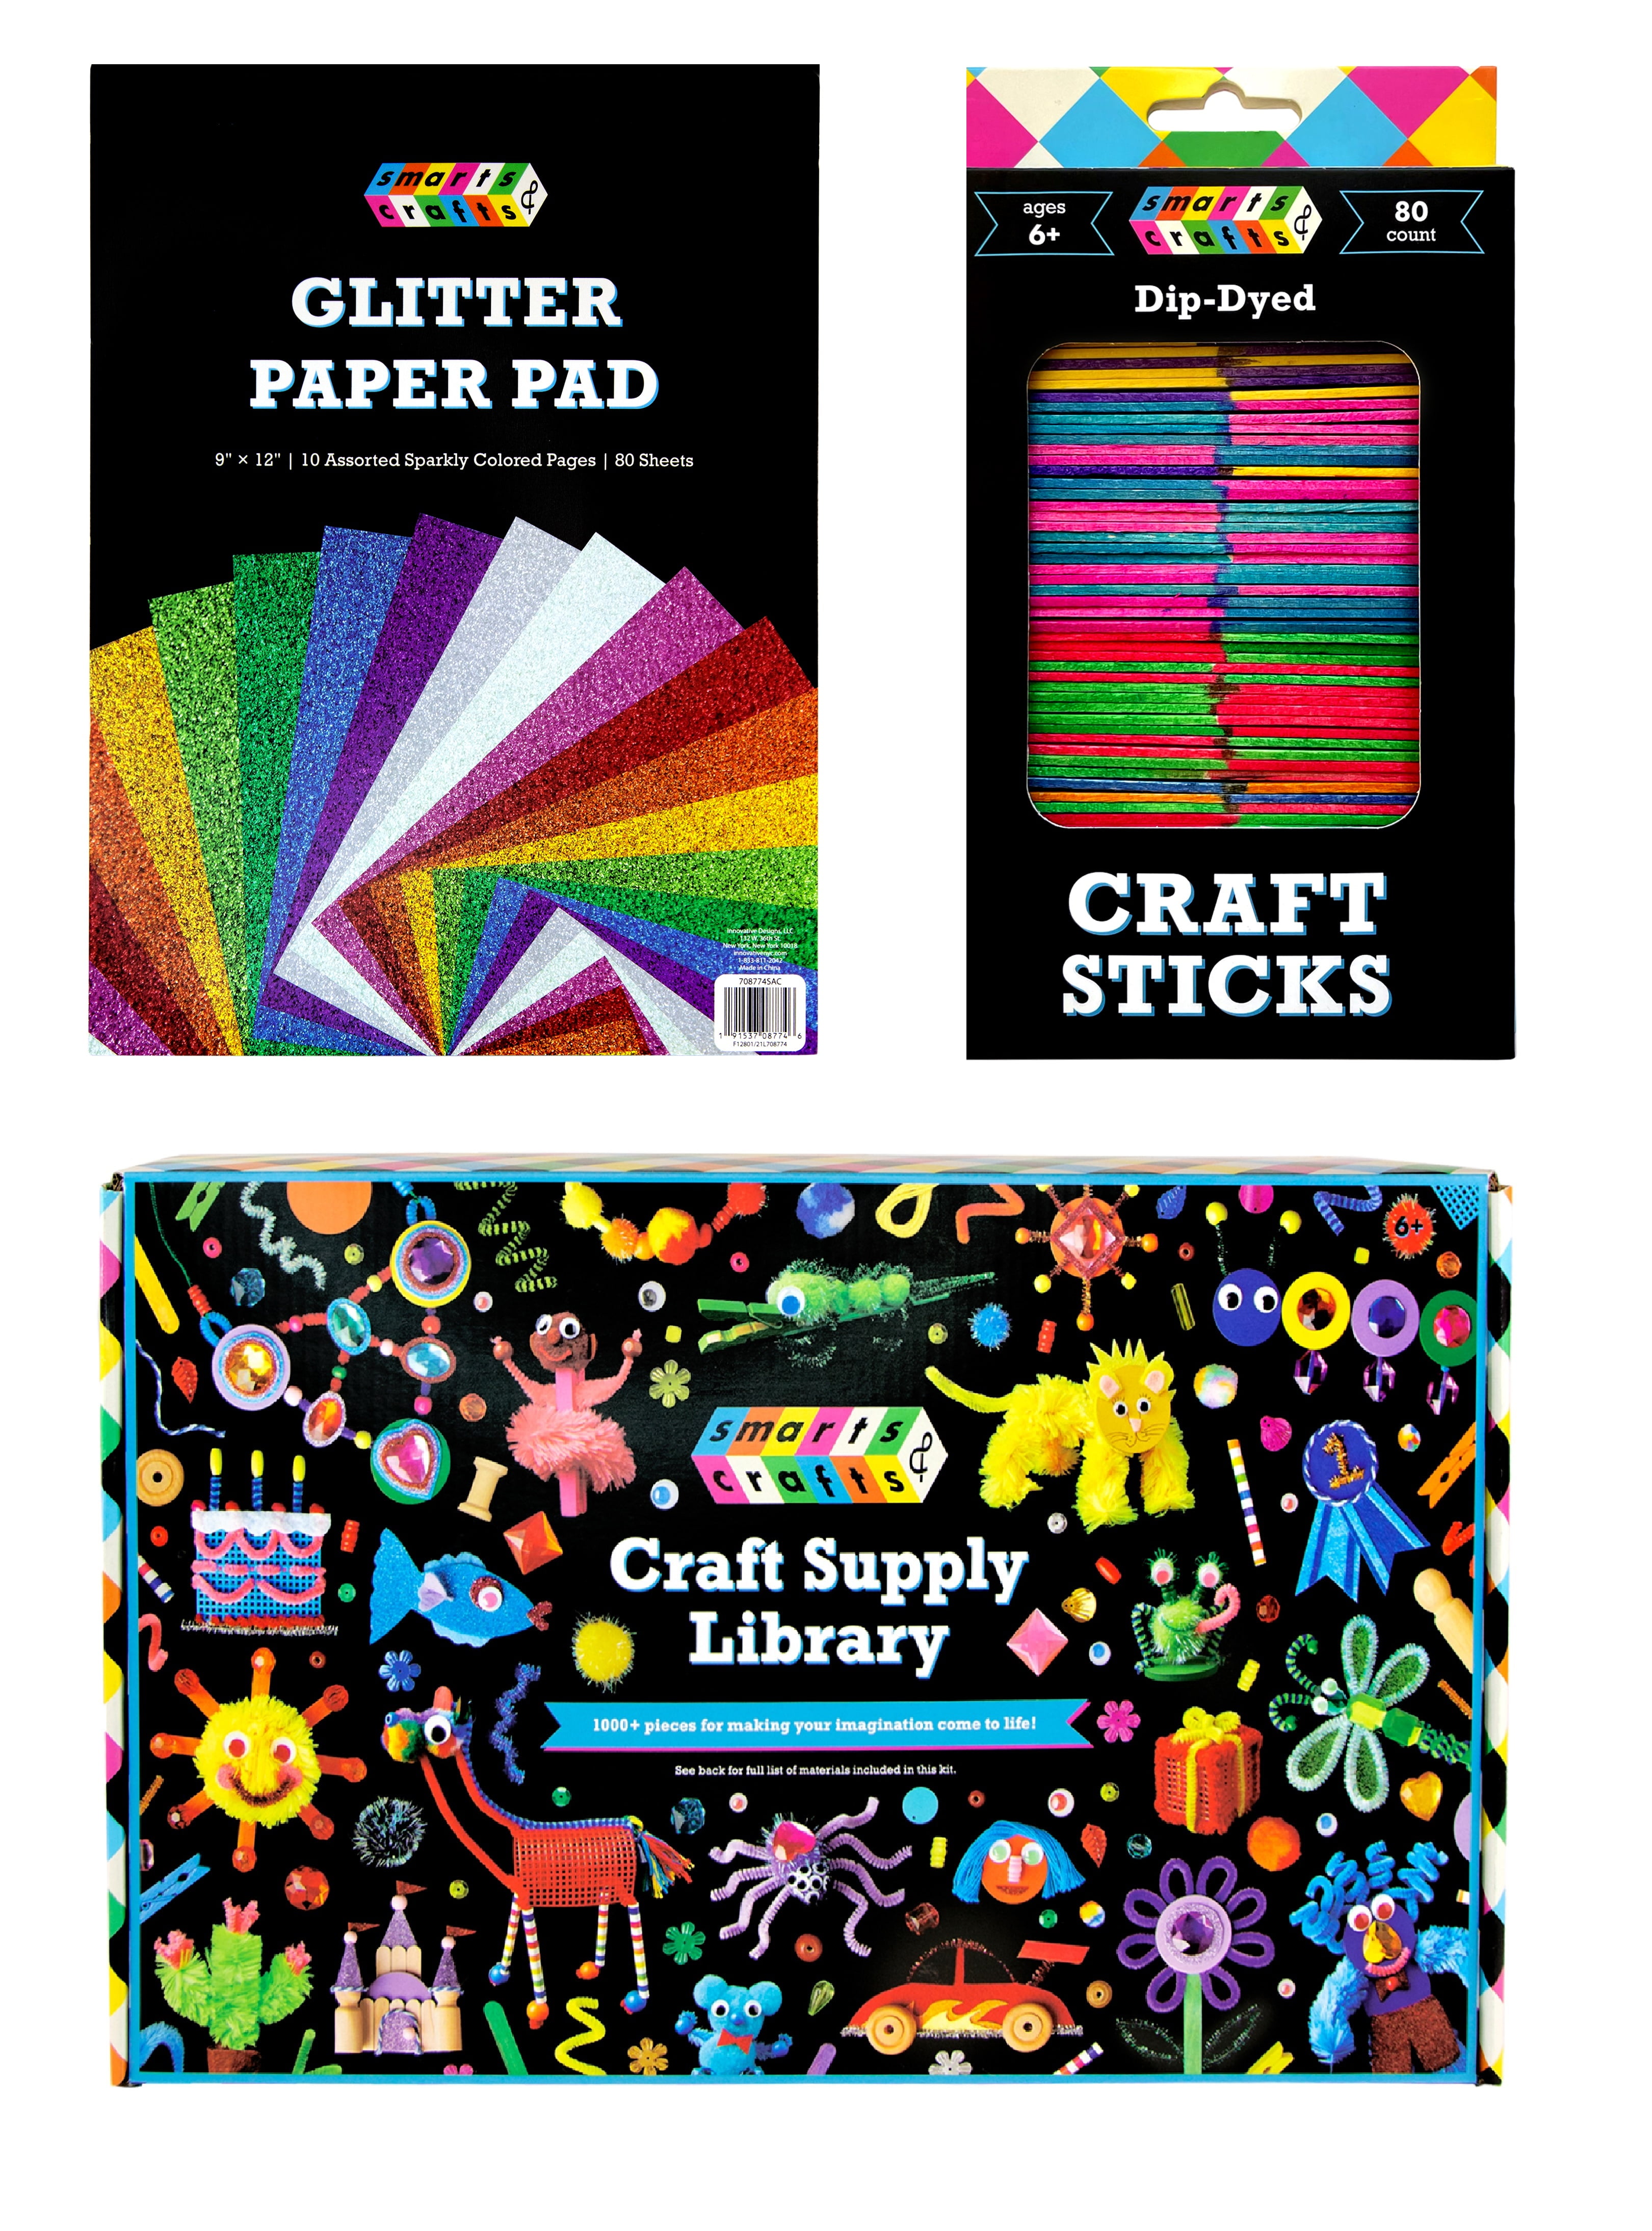 Smarts & Crafts Glitter Paper Pad + Dip-Dyed Craft Sticks + Craft Supply  Library 